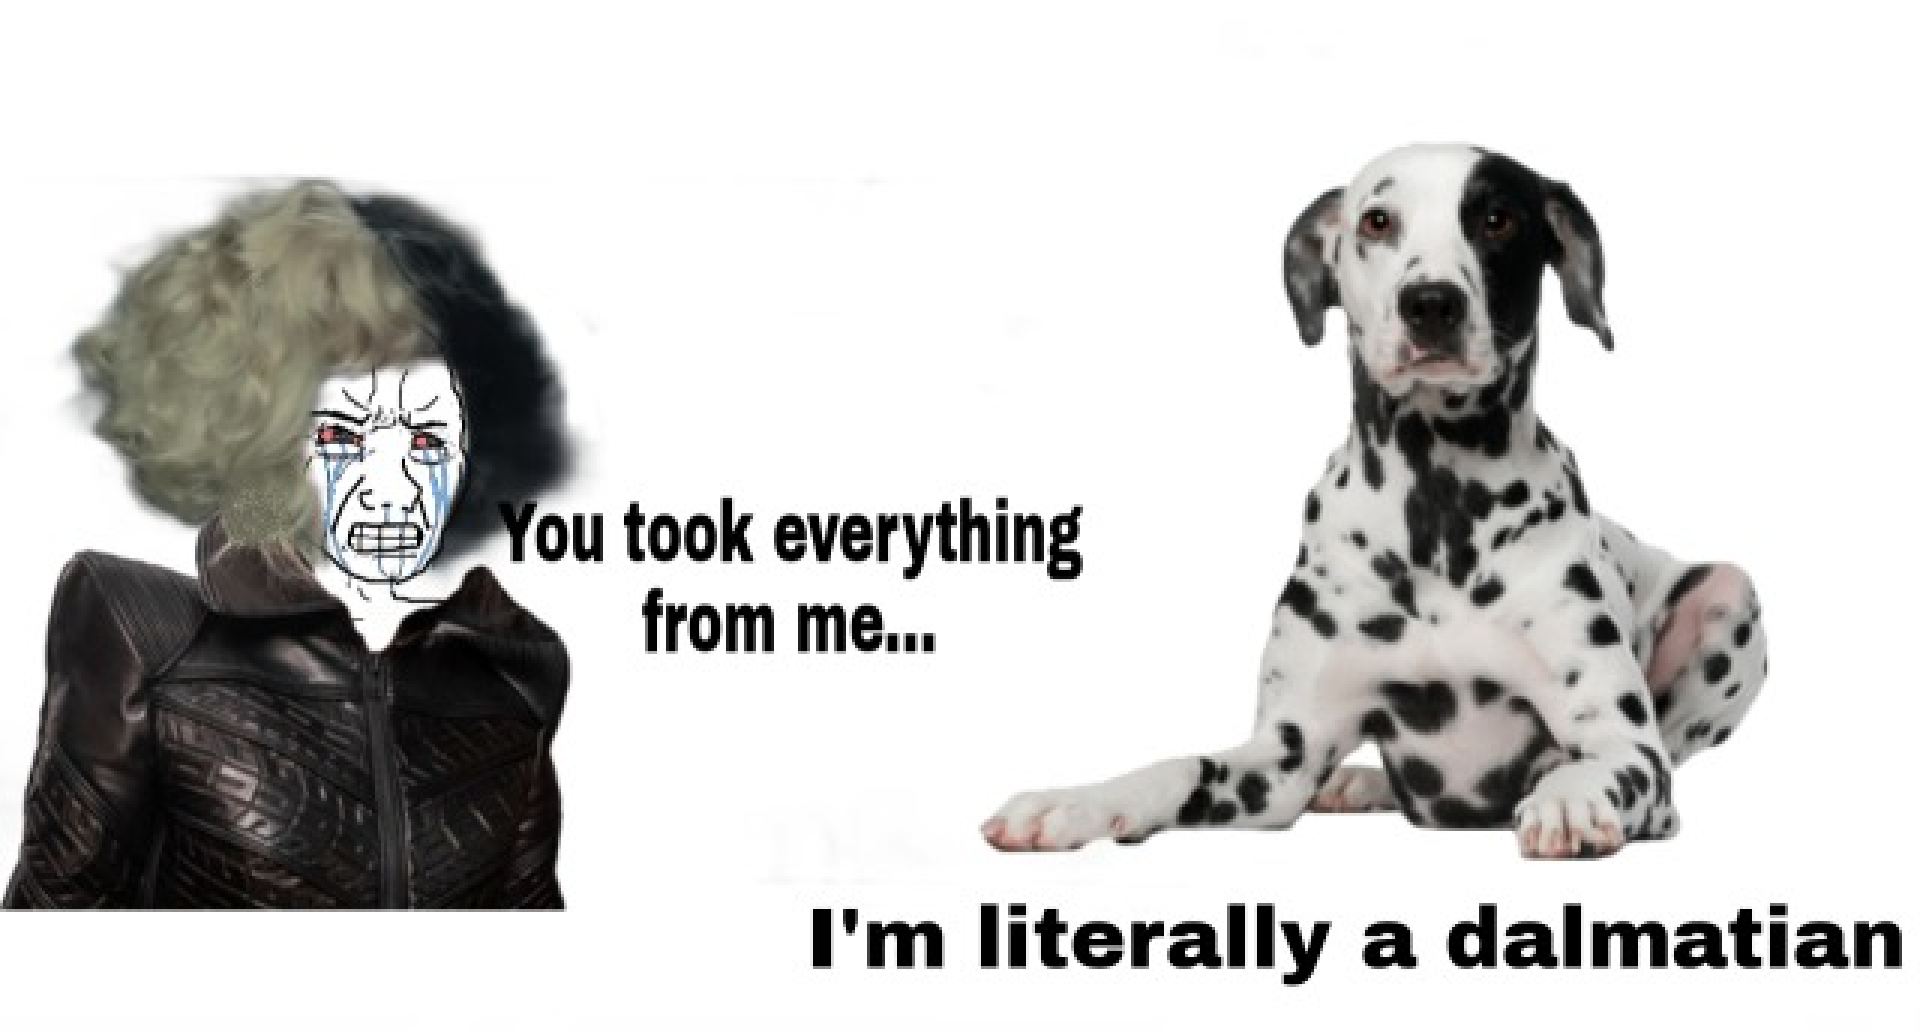 "You took everything from me" meme with Cruella and a dalmation.